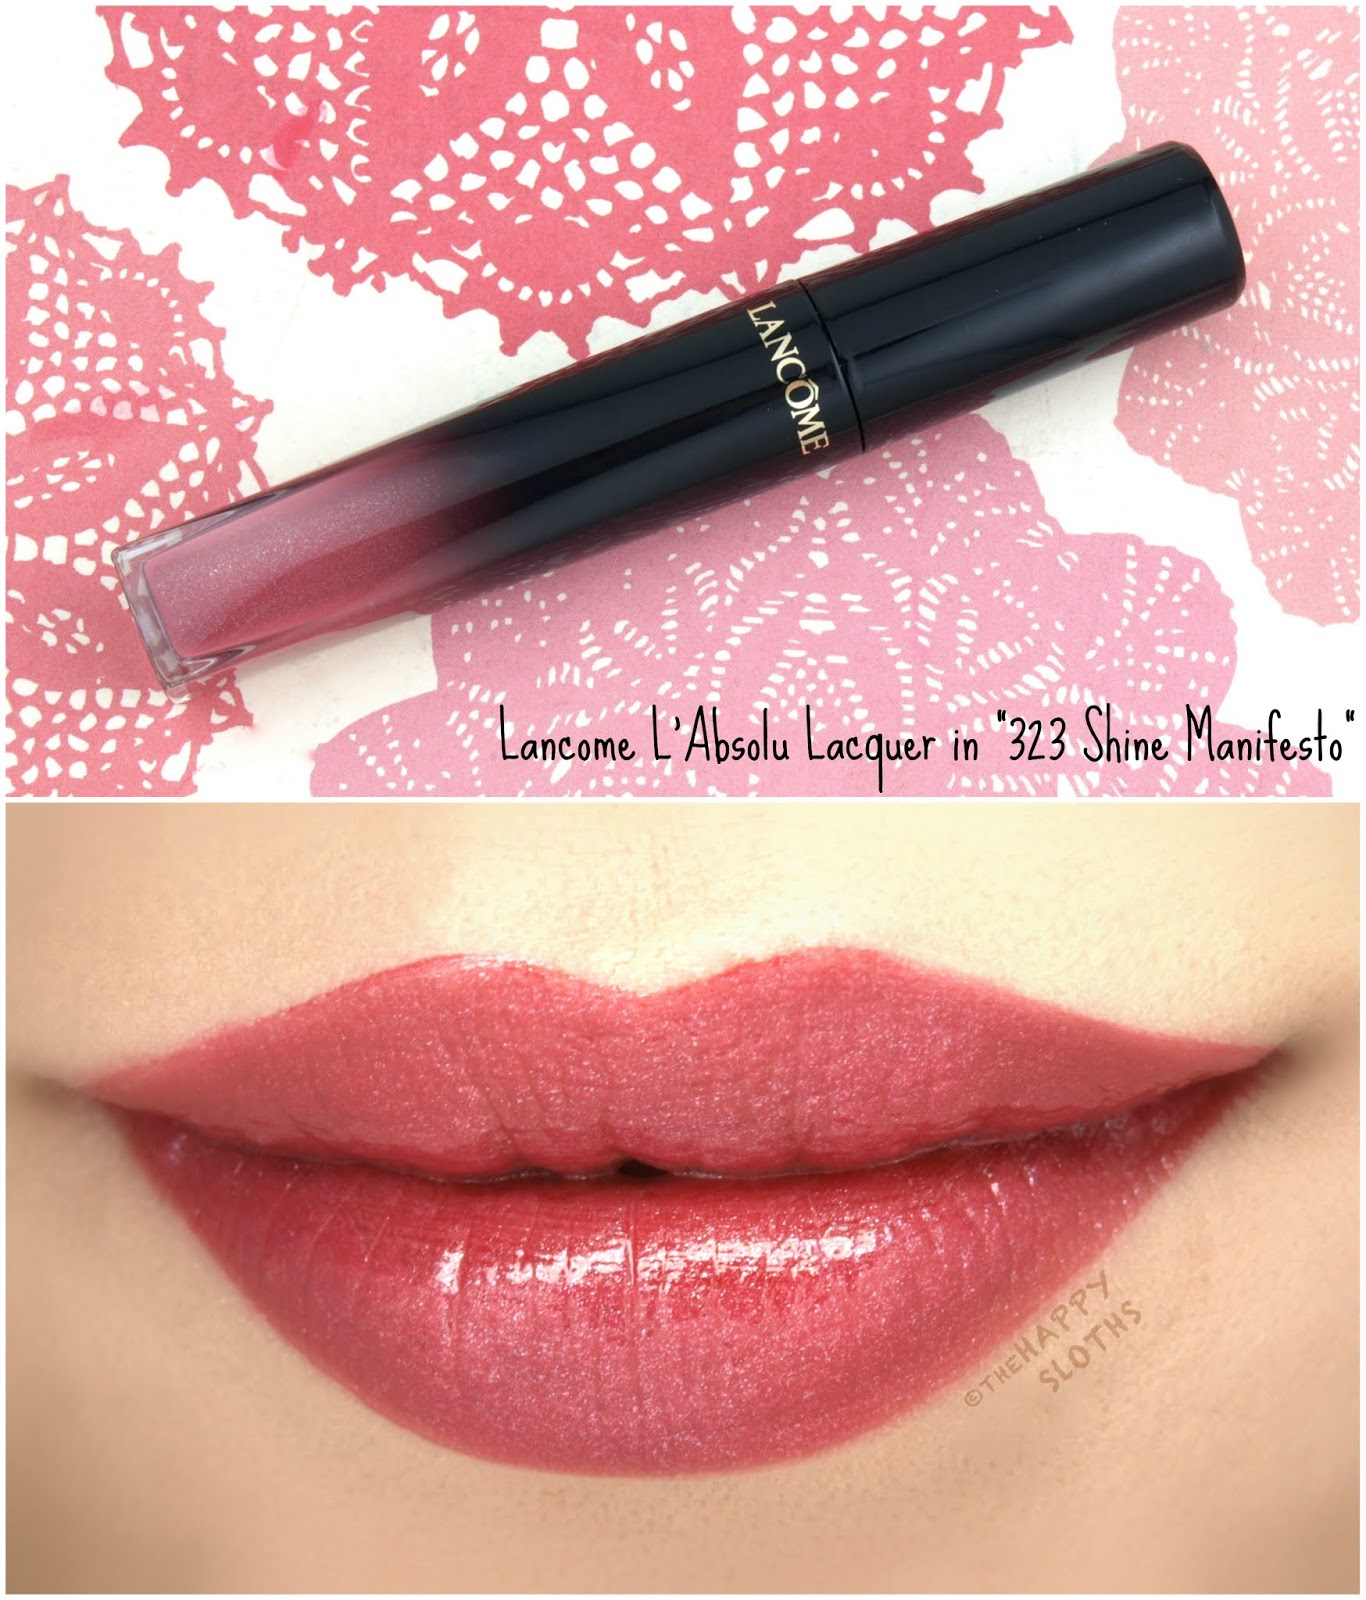 Lancome | L'Absolu Lacquer in "323 Shine Manifesto": Review and Swatches